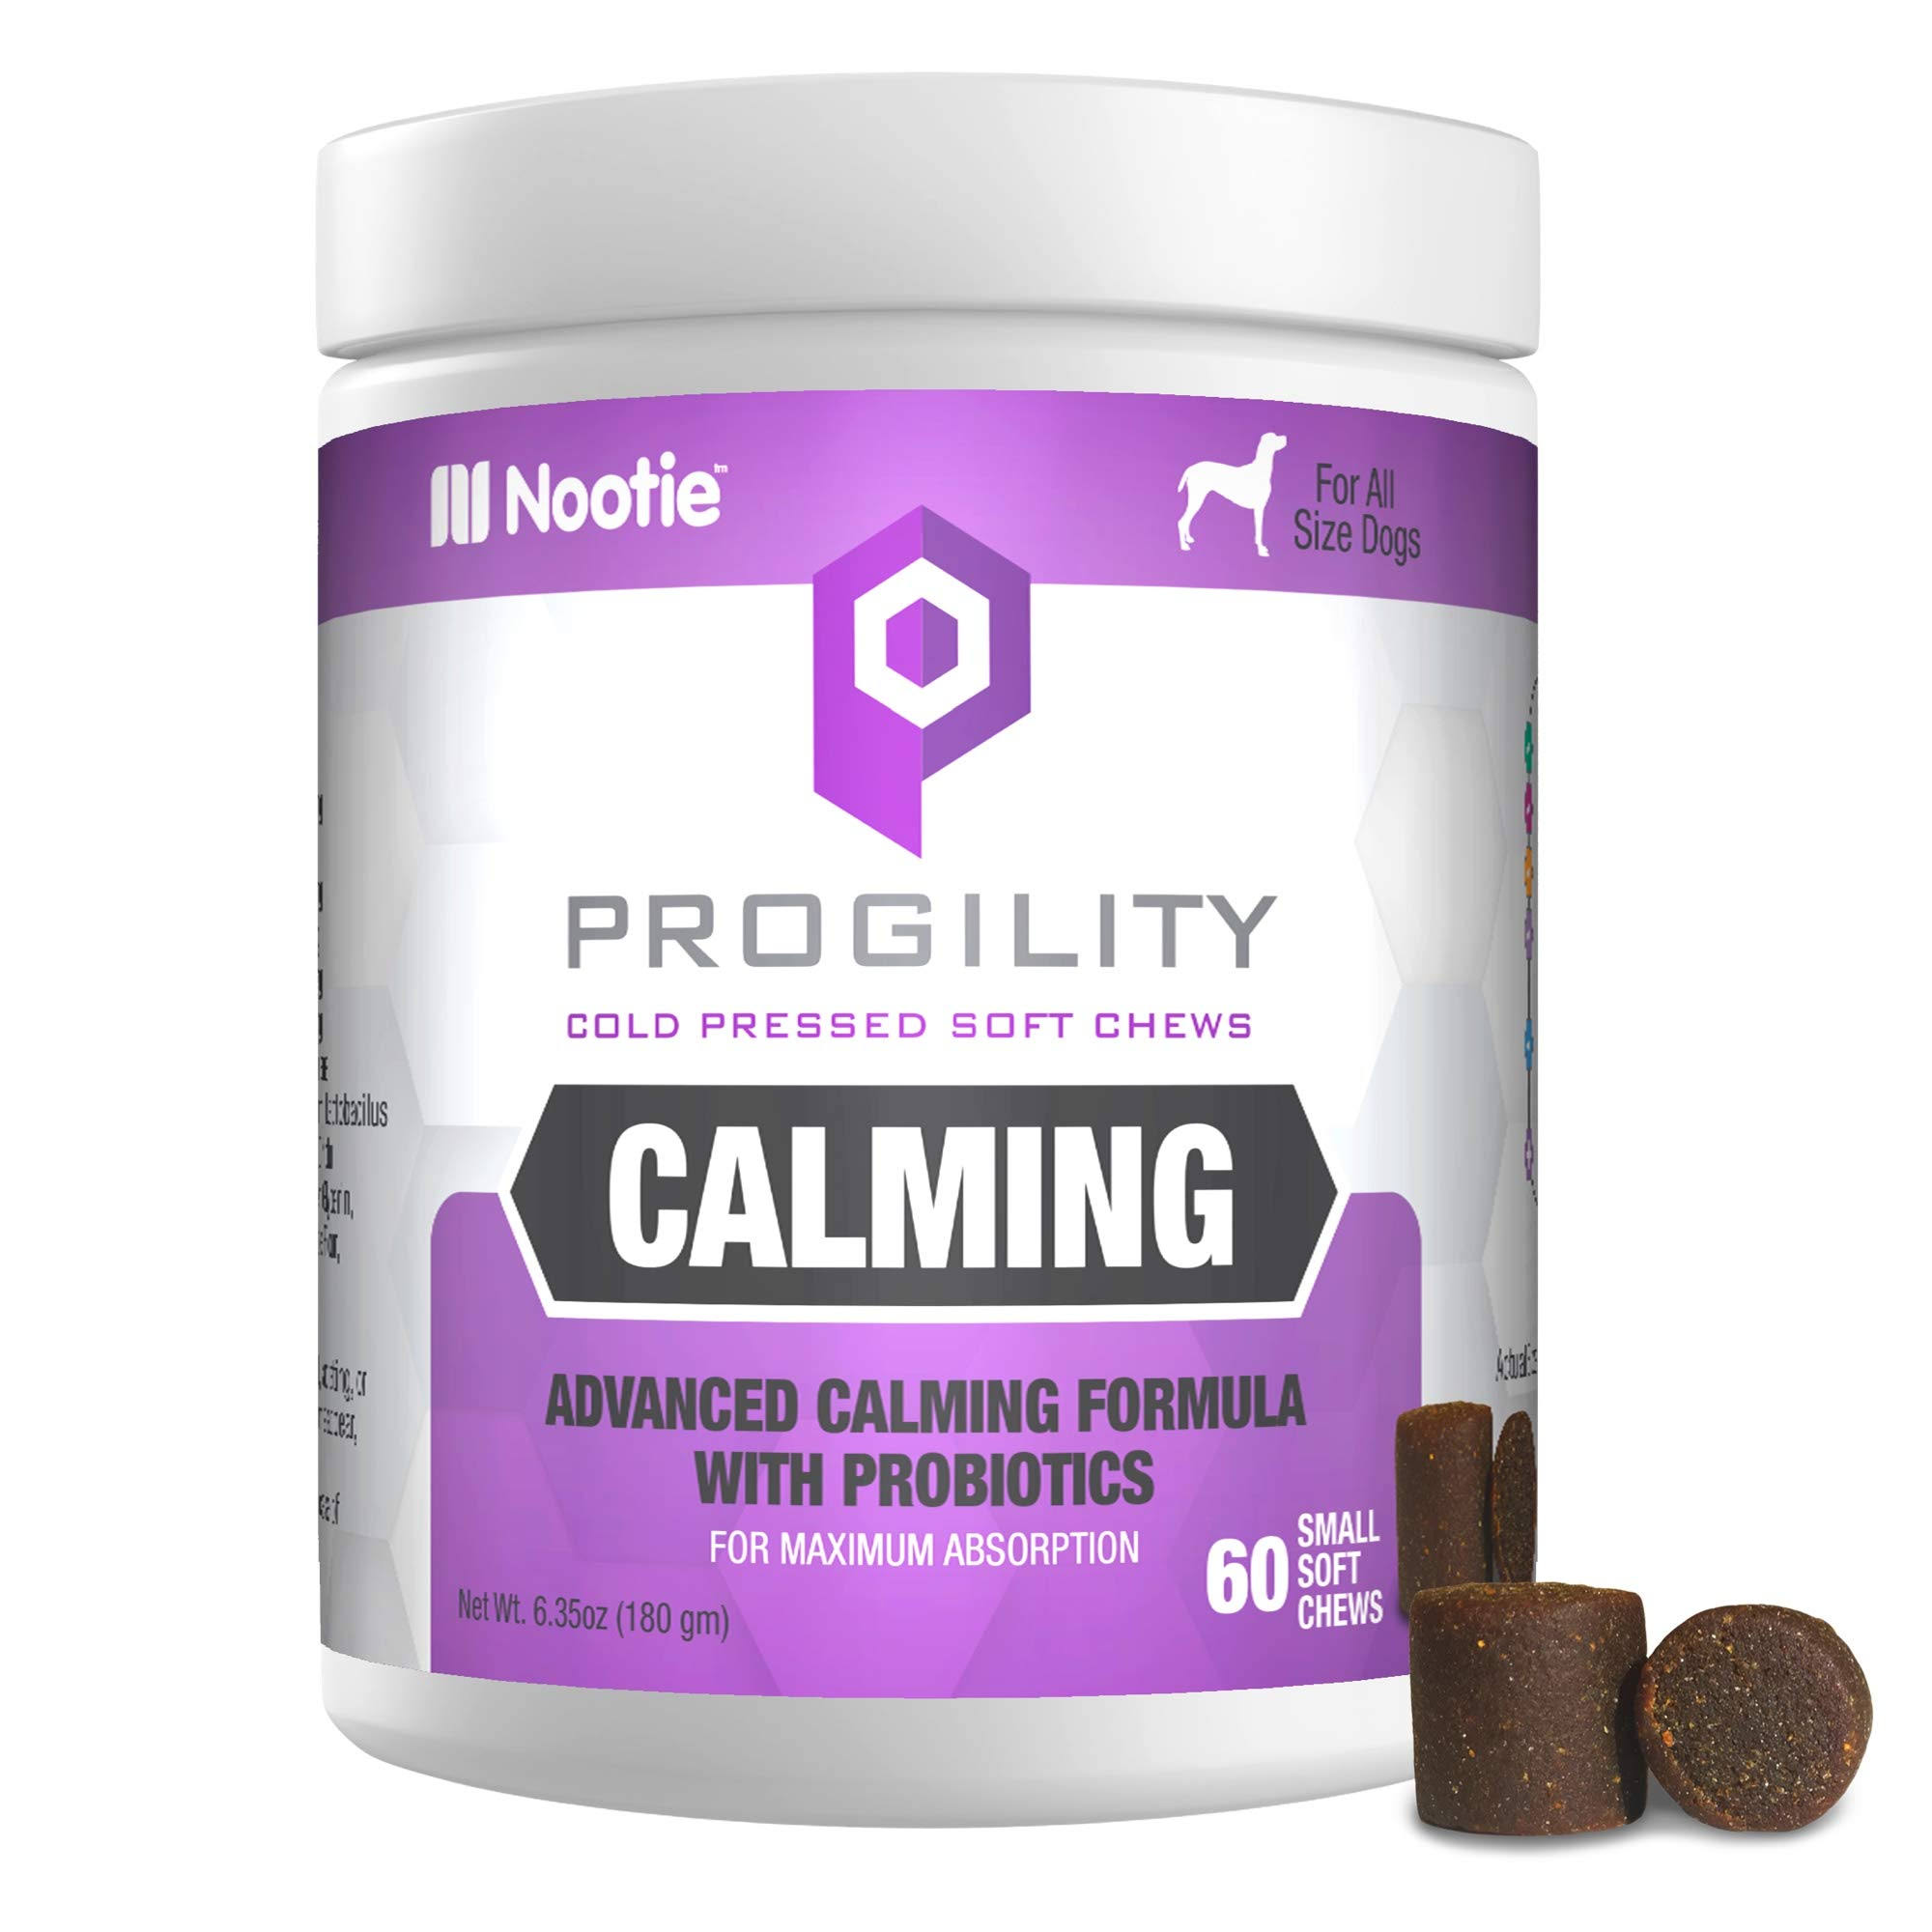 Progility - Calming - Cold Pressed Soft Chews (60 or 90 Count) Multi-Color Calming - Small Size Soft Chew - 60 Count